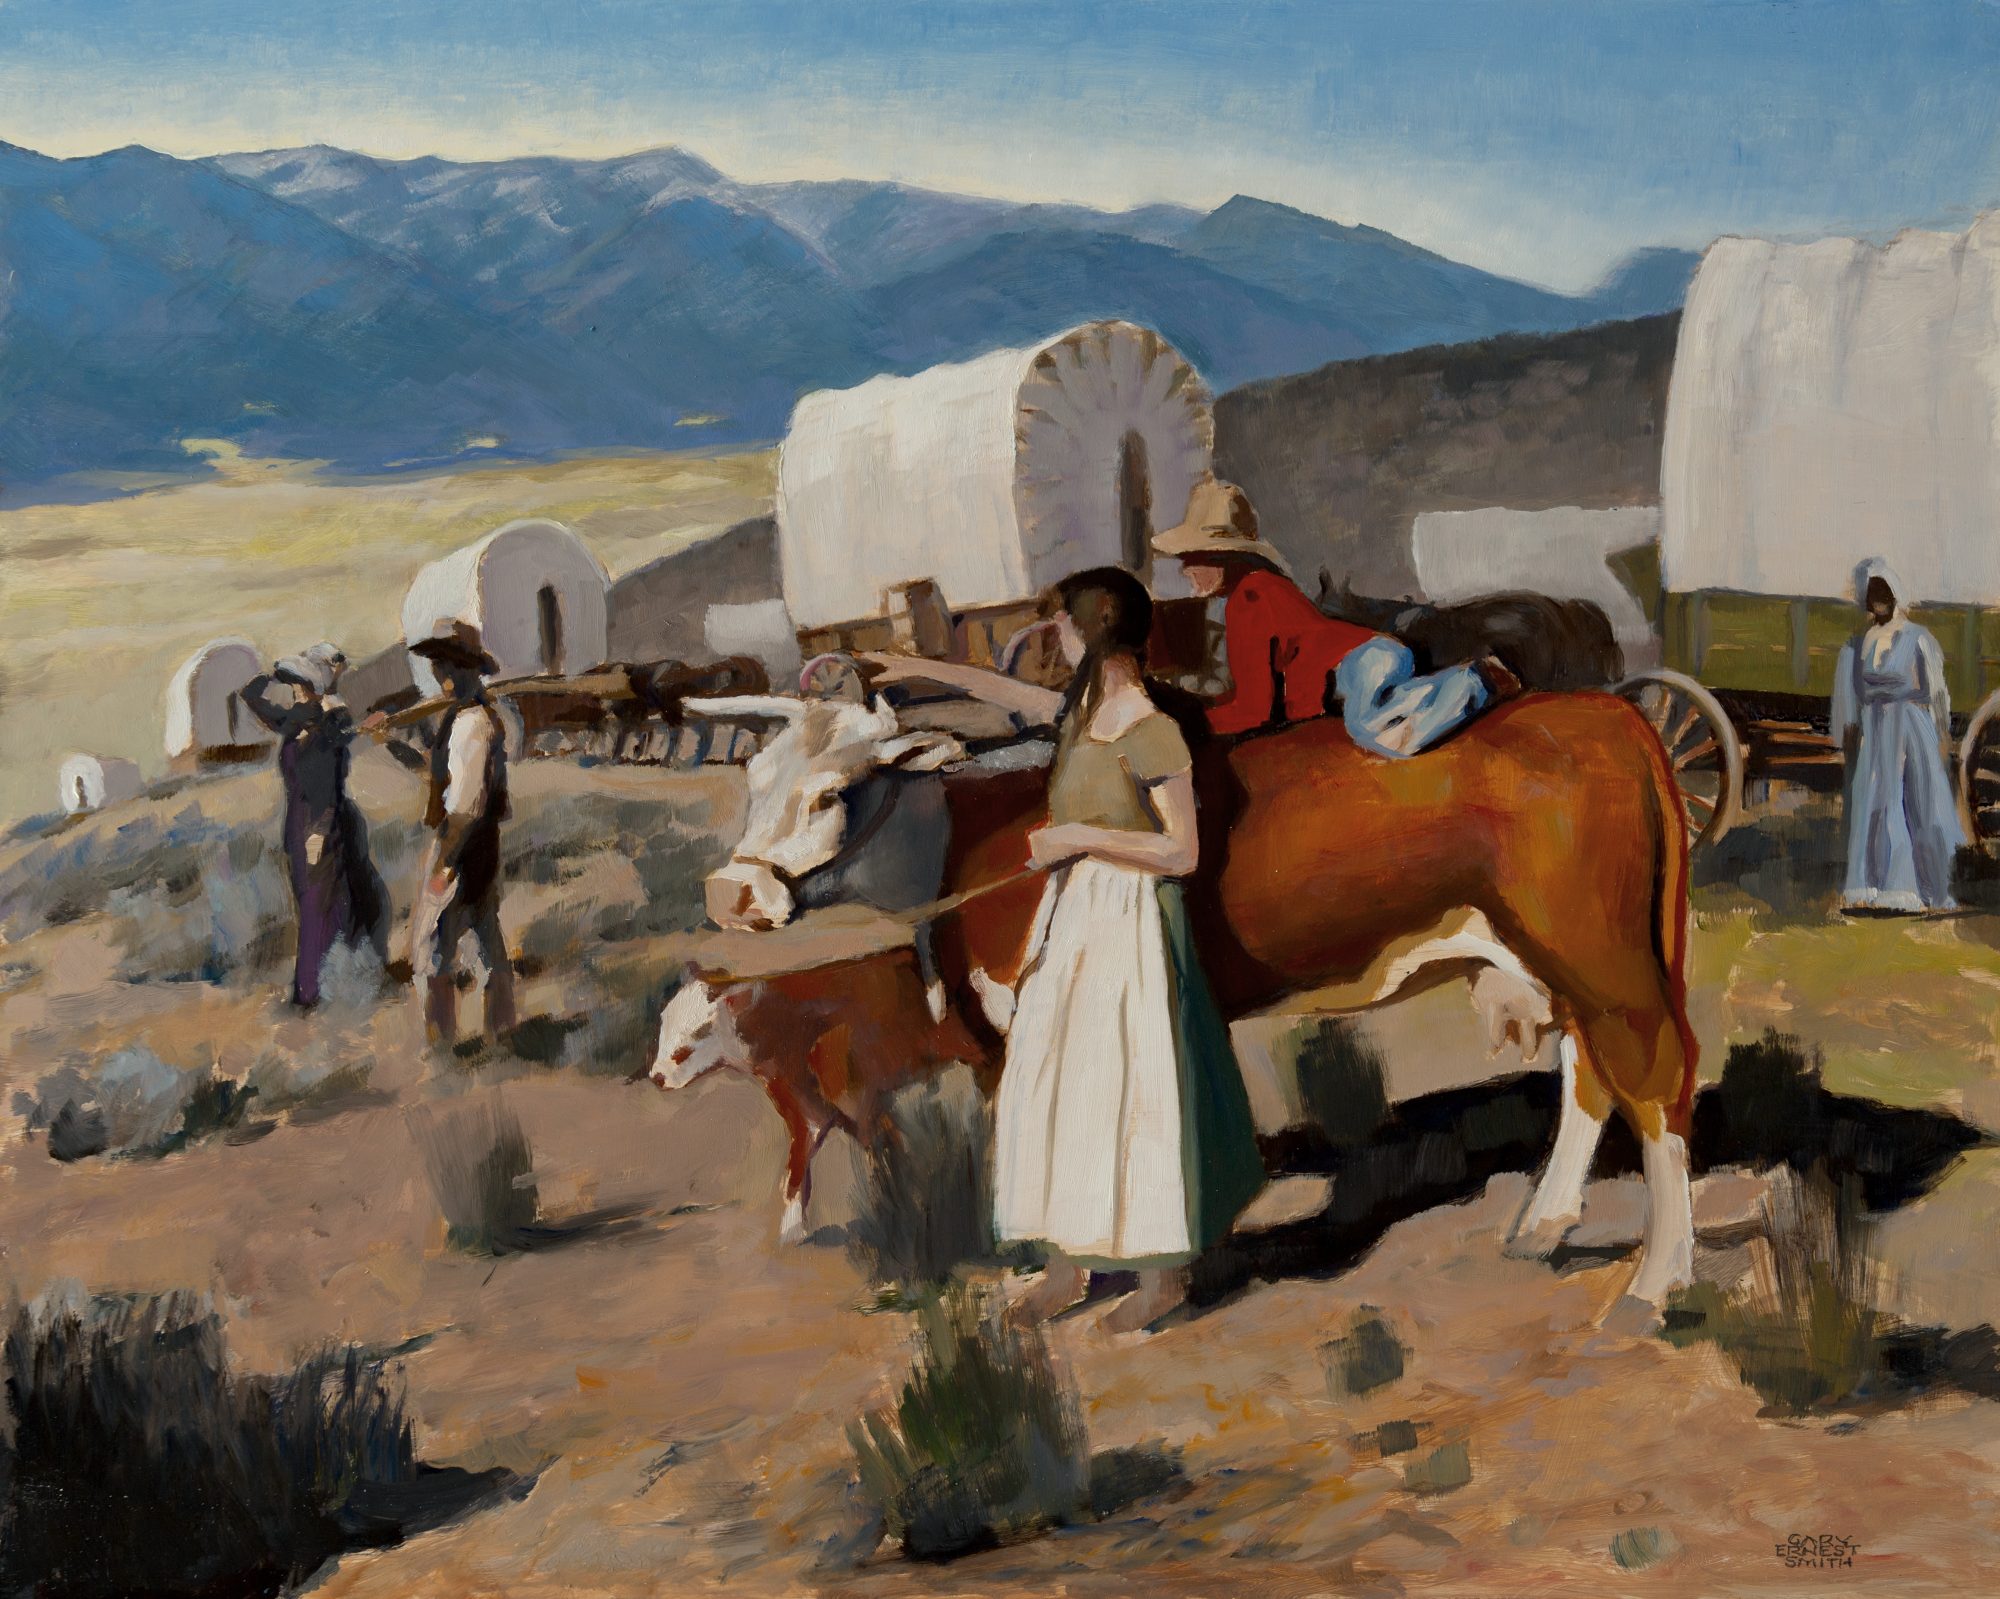 Towards Home: The Art Of Gary Ernest Smith